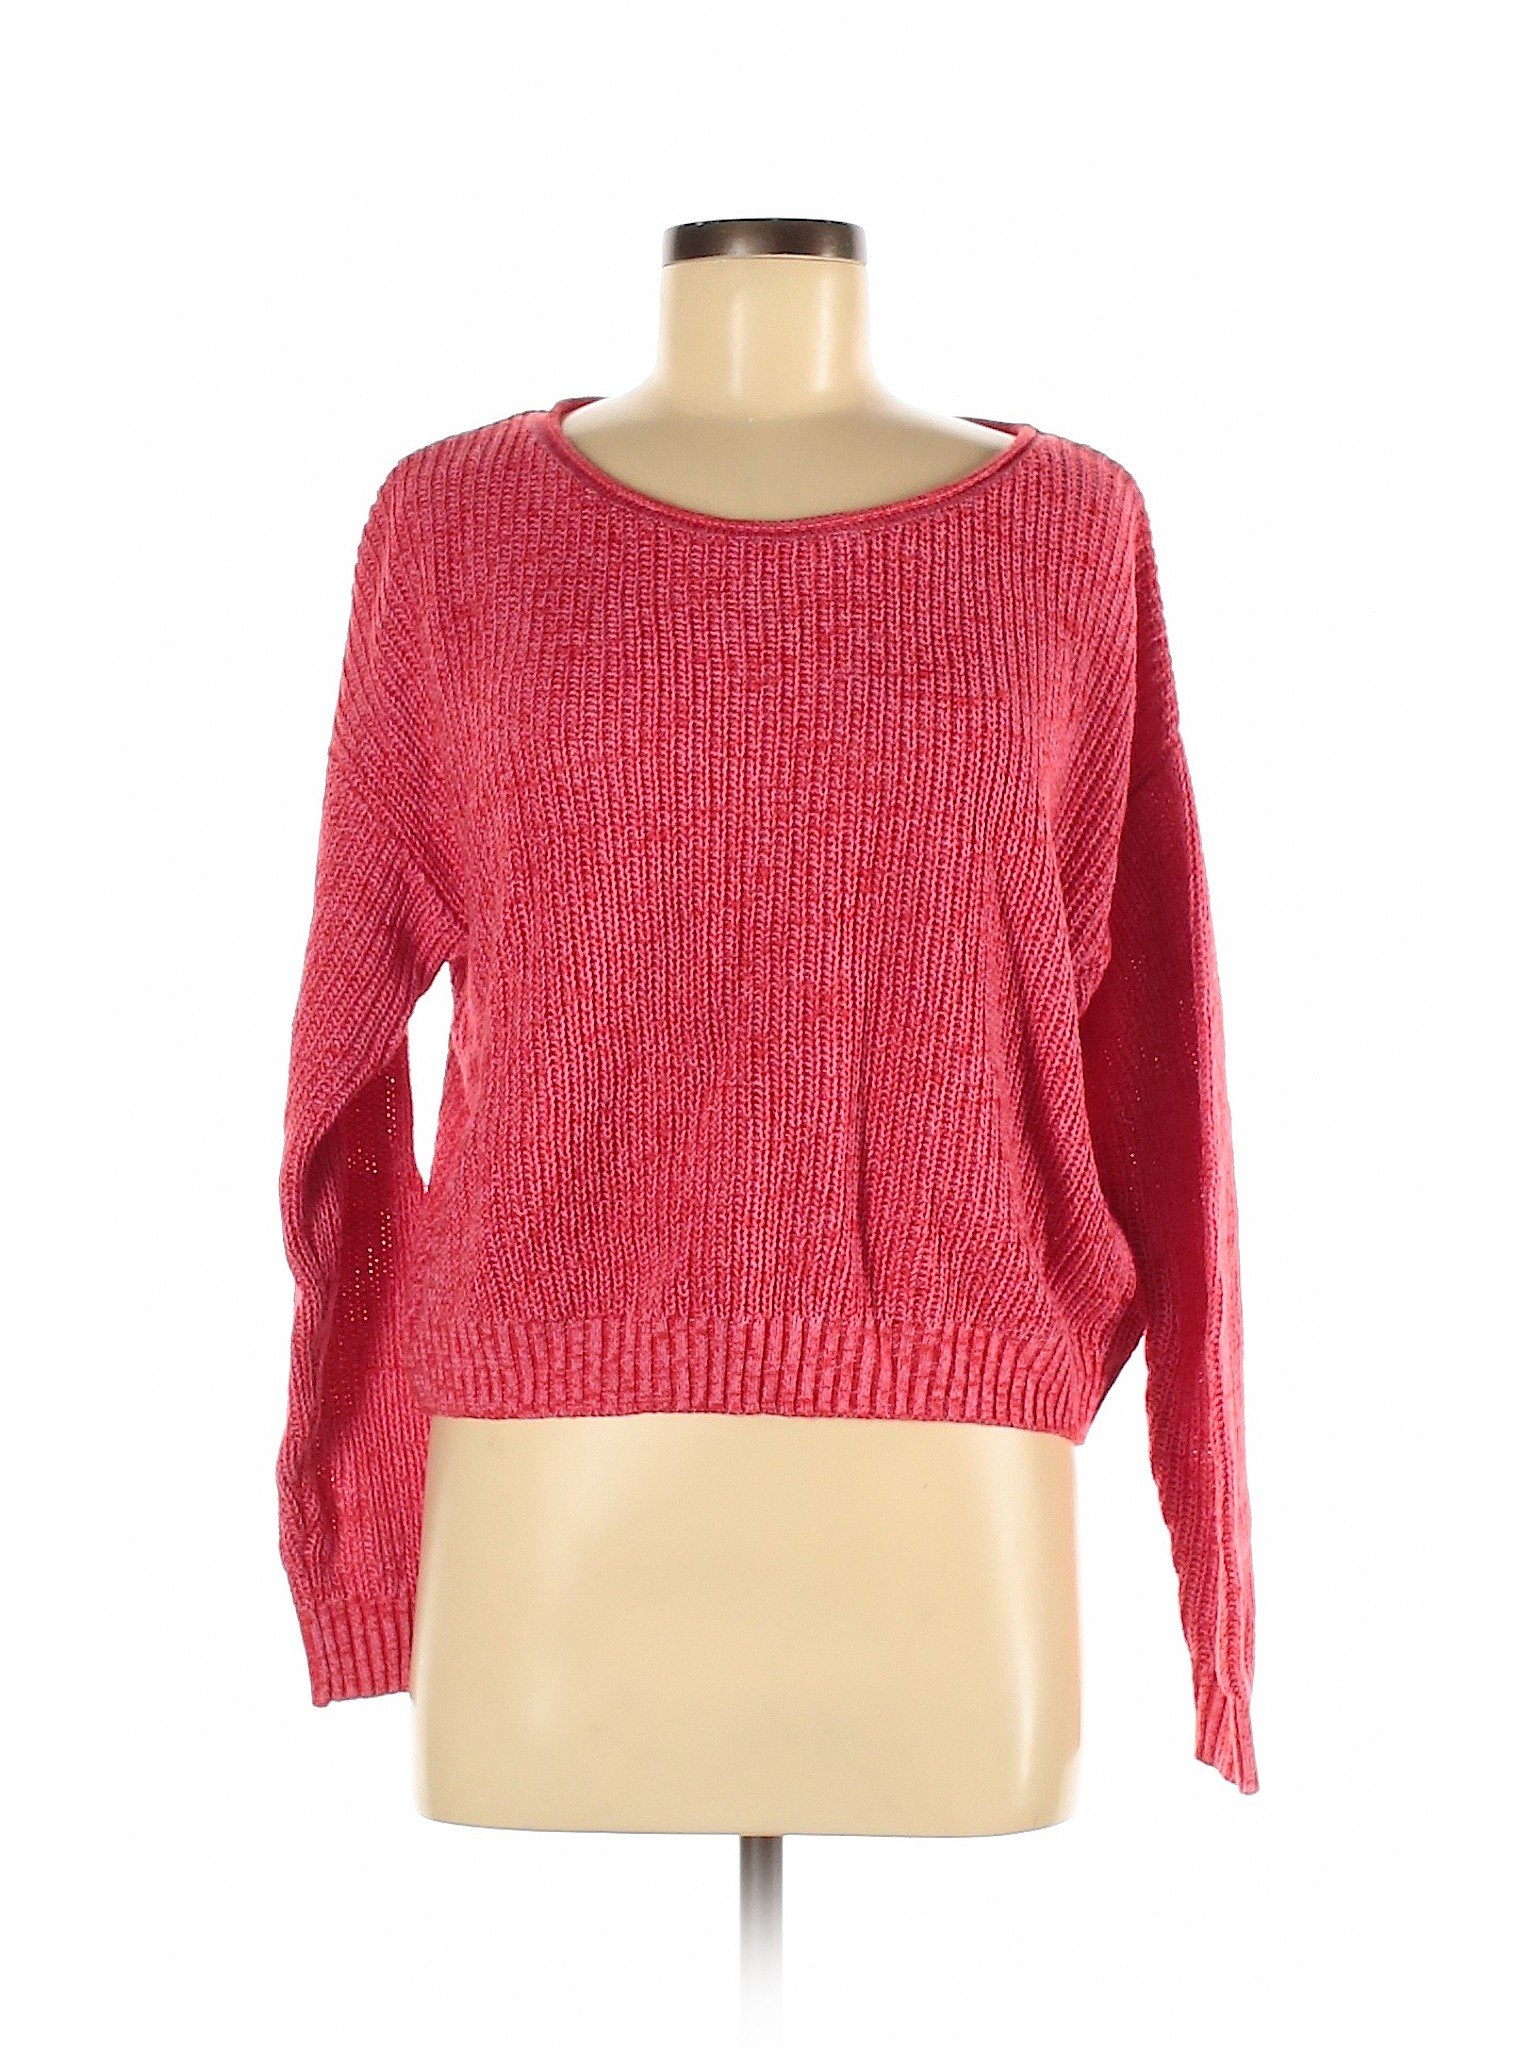 Wild Fable Women Red Pullover Sweater M | eBay